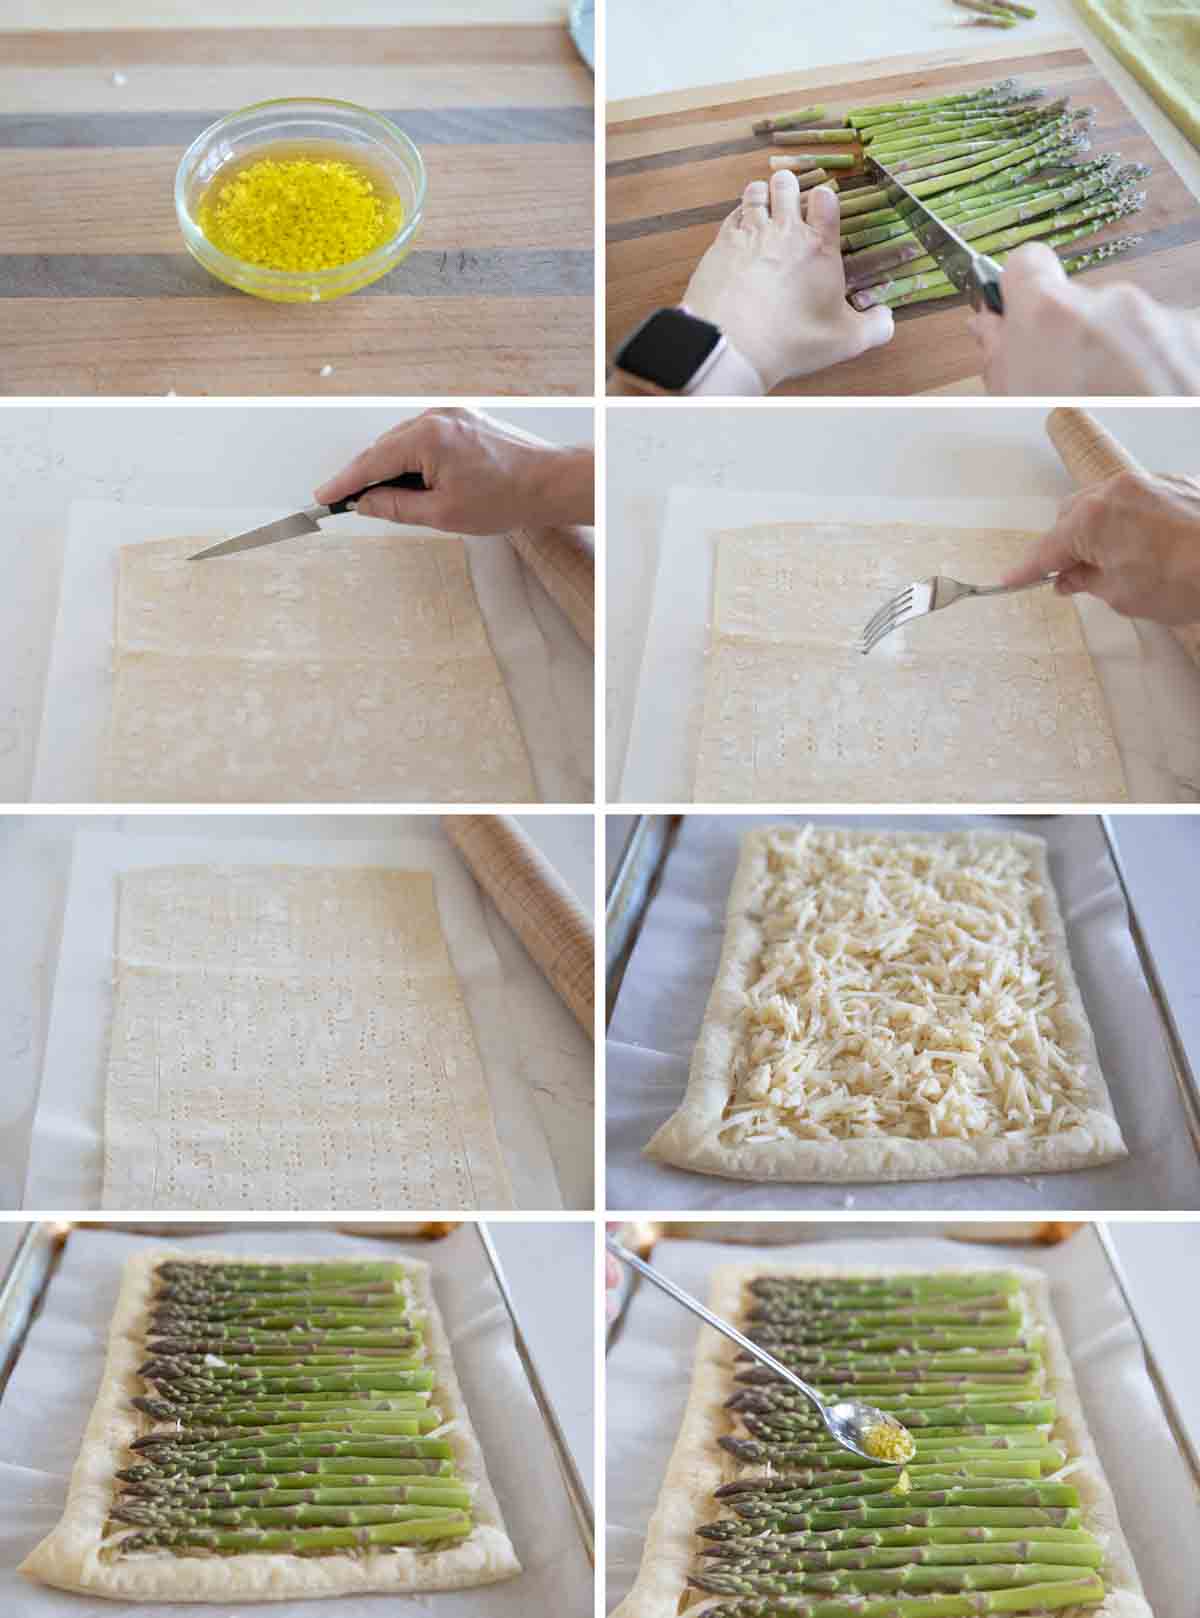 step by step photos showing how to make an asparagus tart